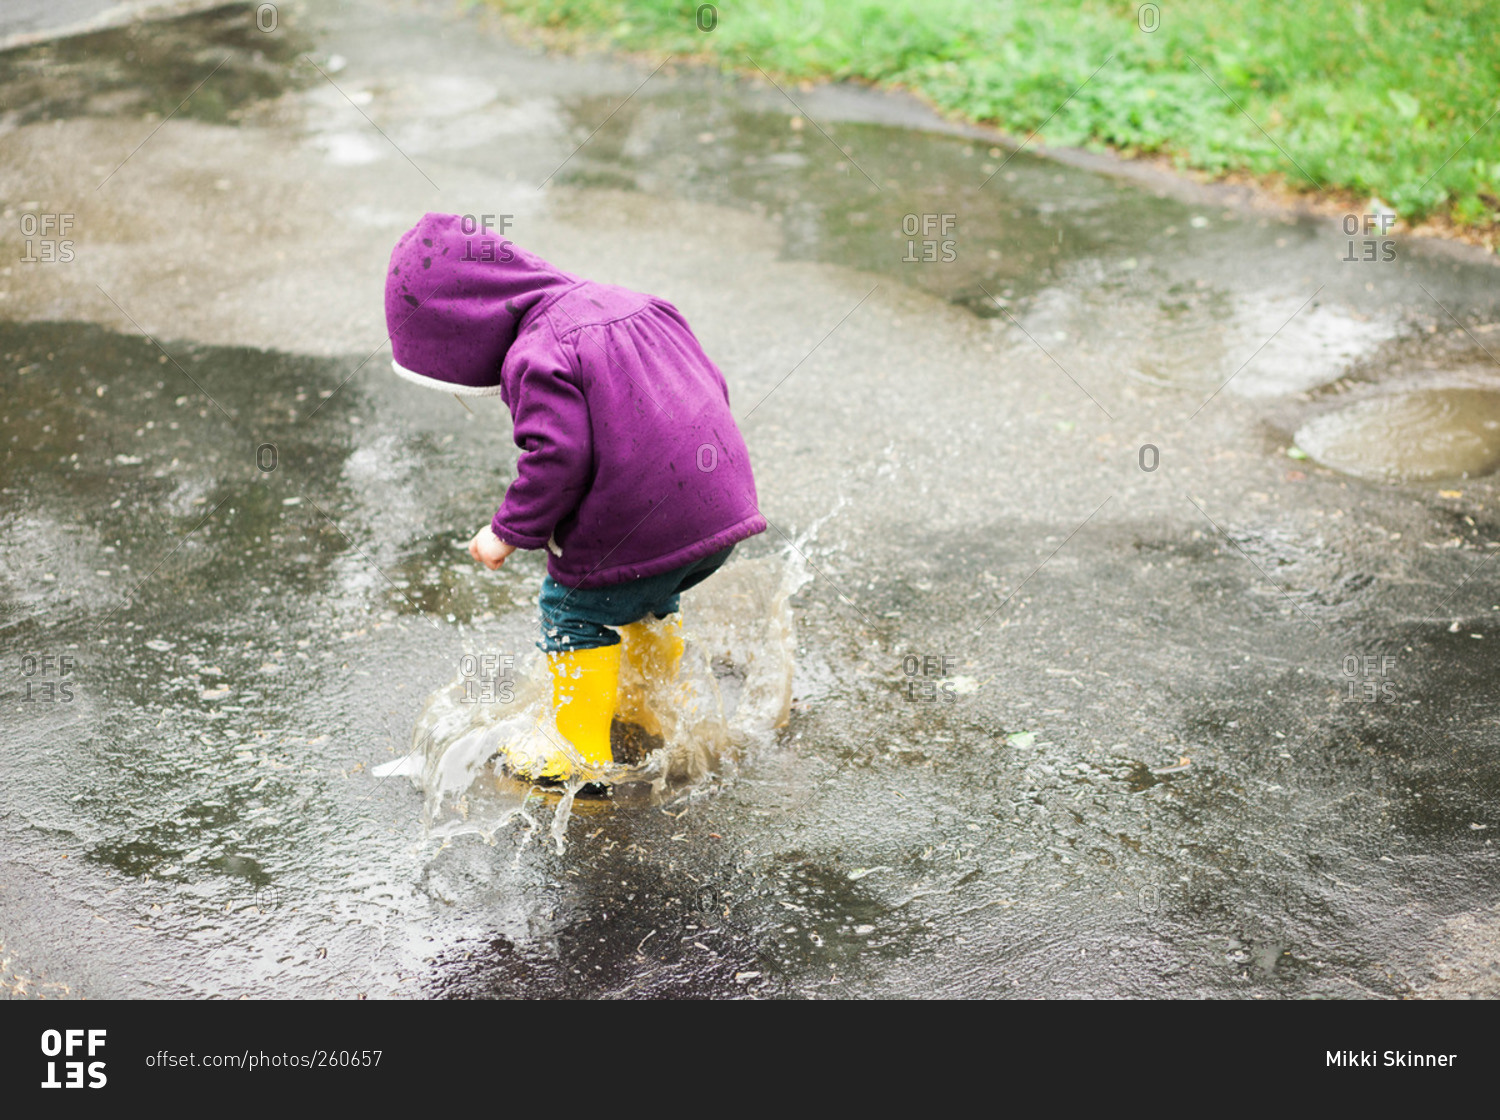 Girl playing in a rain puddle on pavement